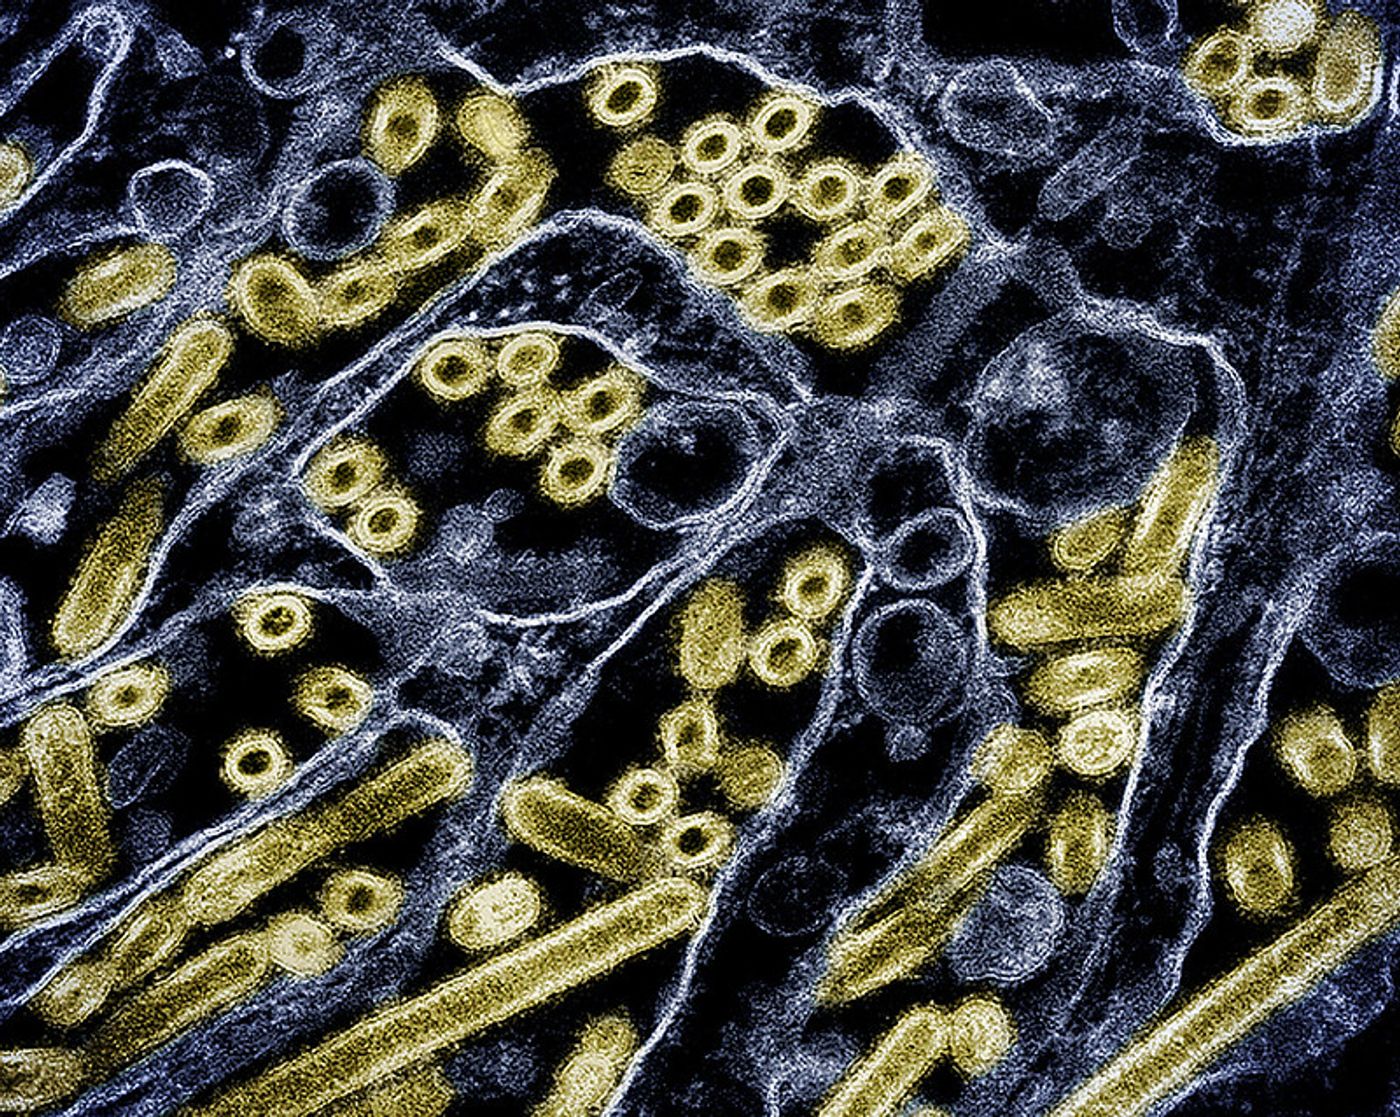 Colorized transmission electron micrograph of avian influenza A H5N1 virus particles (gold), grown in Madin-Darby Canine Kidney (MDCK) epithelial cells. Microscopy by CDC; repositioned and recolored by NIAID. Credit: CDC and NIAID 